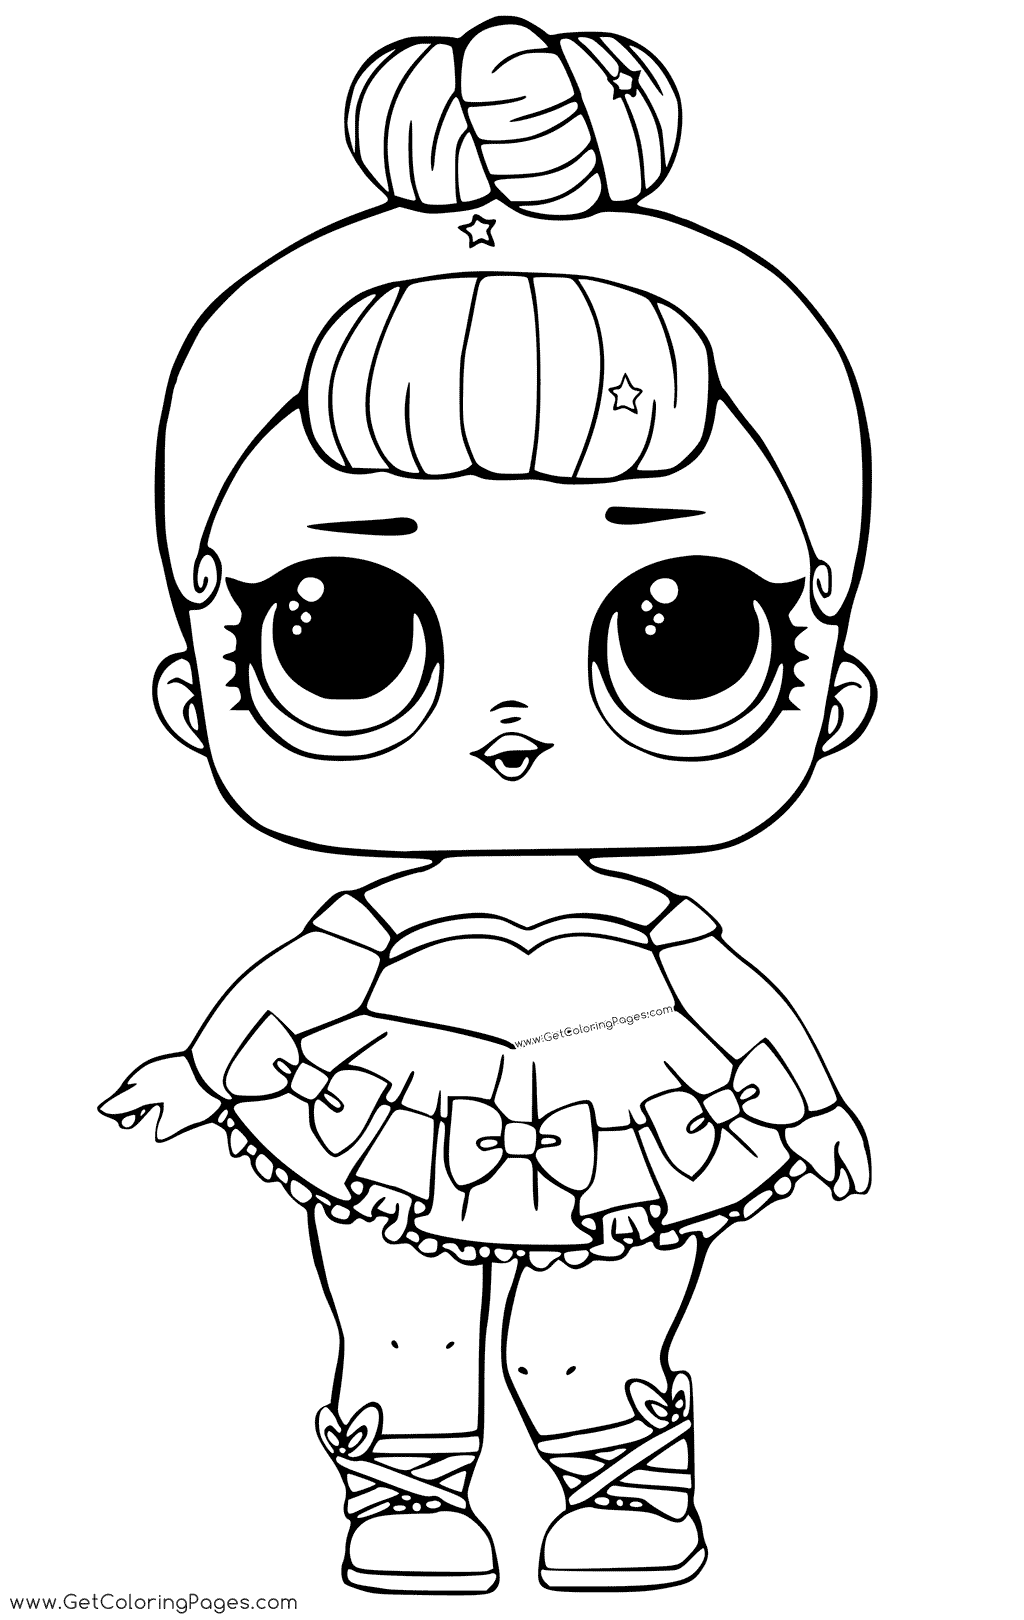 LOL Coloring Pages FREE Printable 9